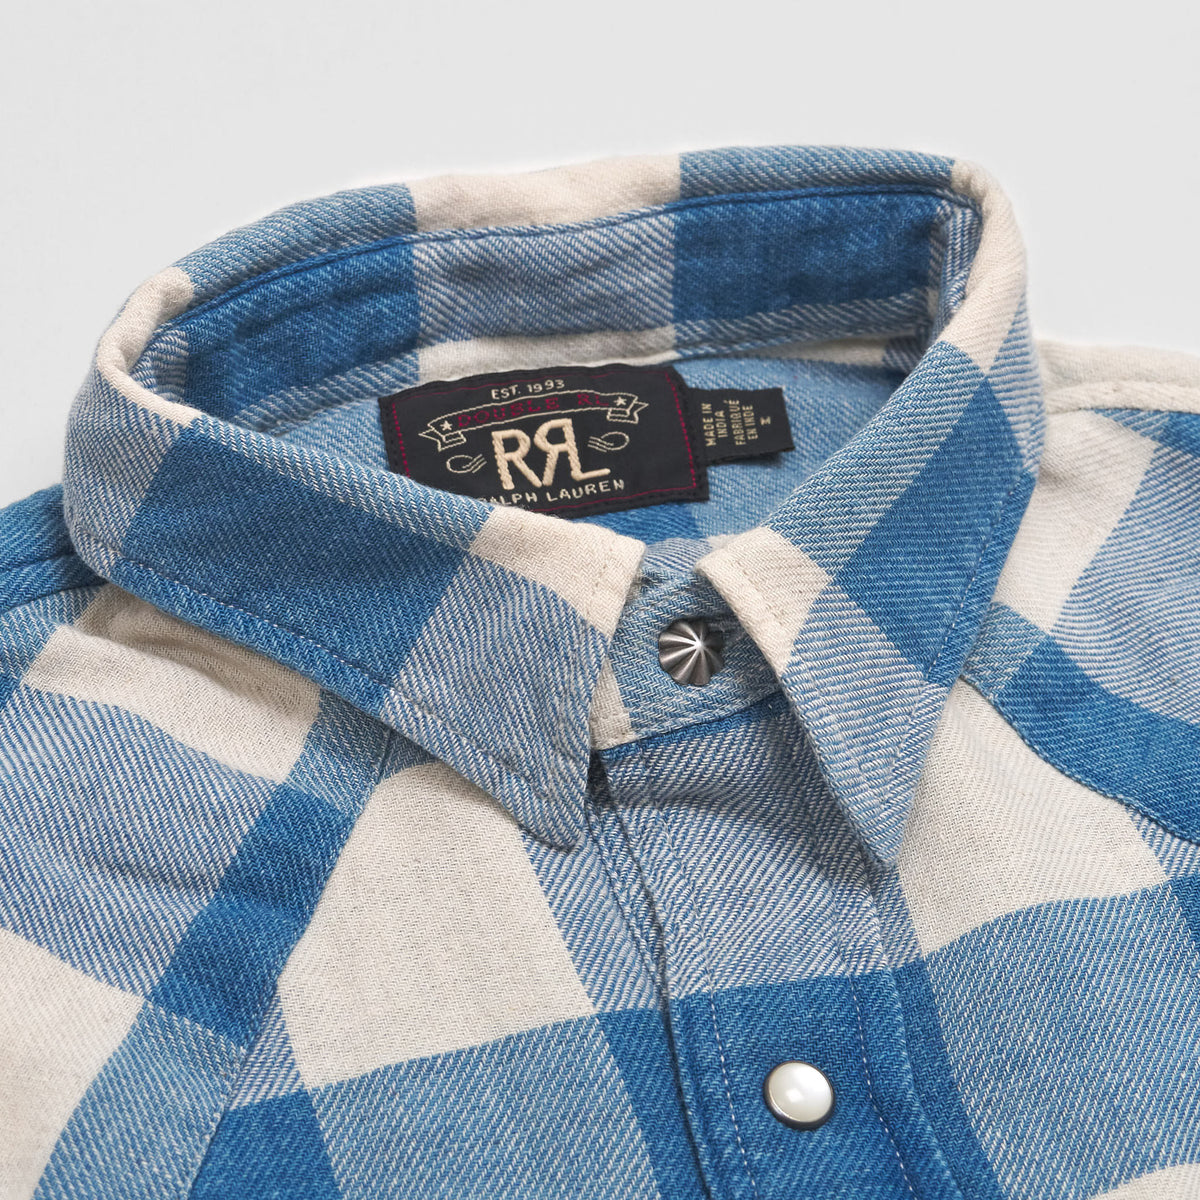 DoubleRL Western check shirt.